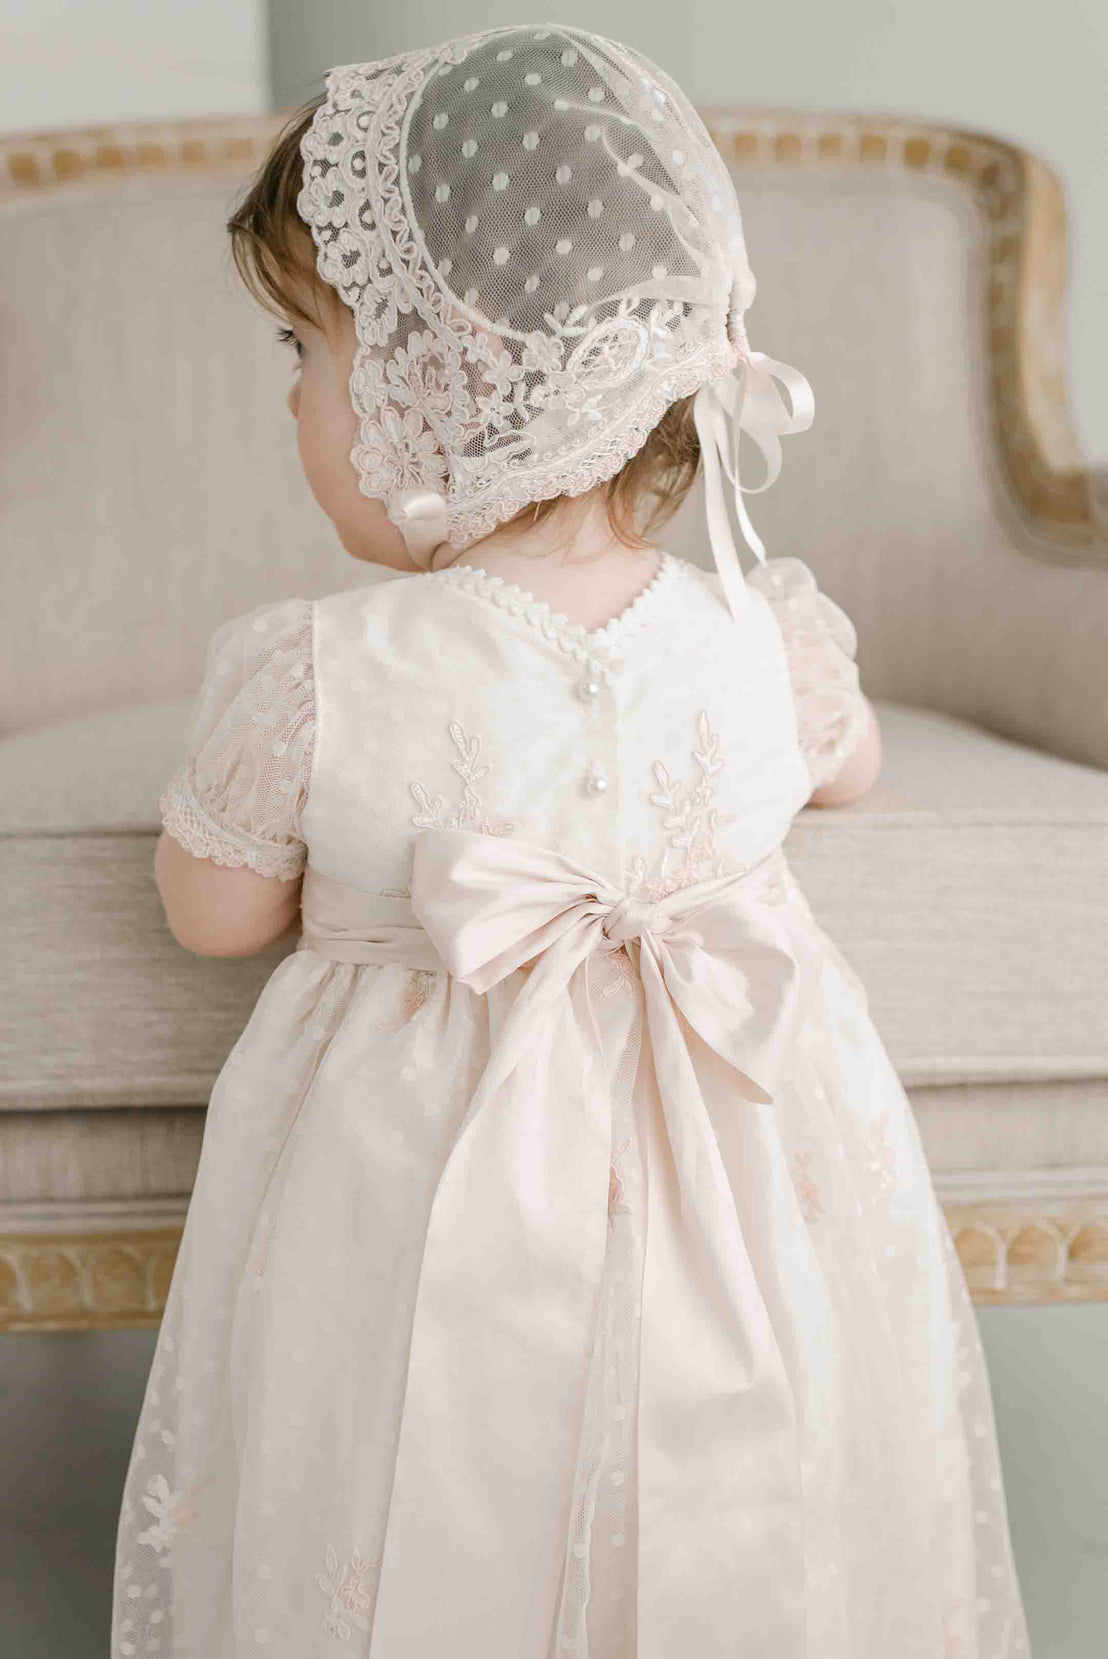 A young child in a delicate white lace christening dress and the Elizabeth Lace Bonnet, seen from behind, sitting on a beige sofa with a subtle floral design. The focus is on the detailed texture of the bonnet.